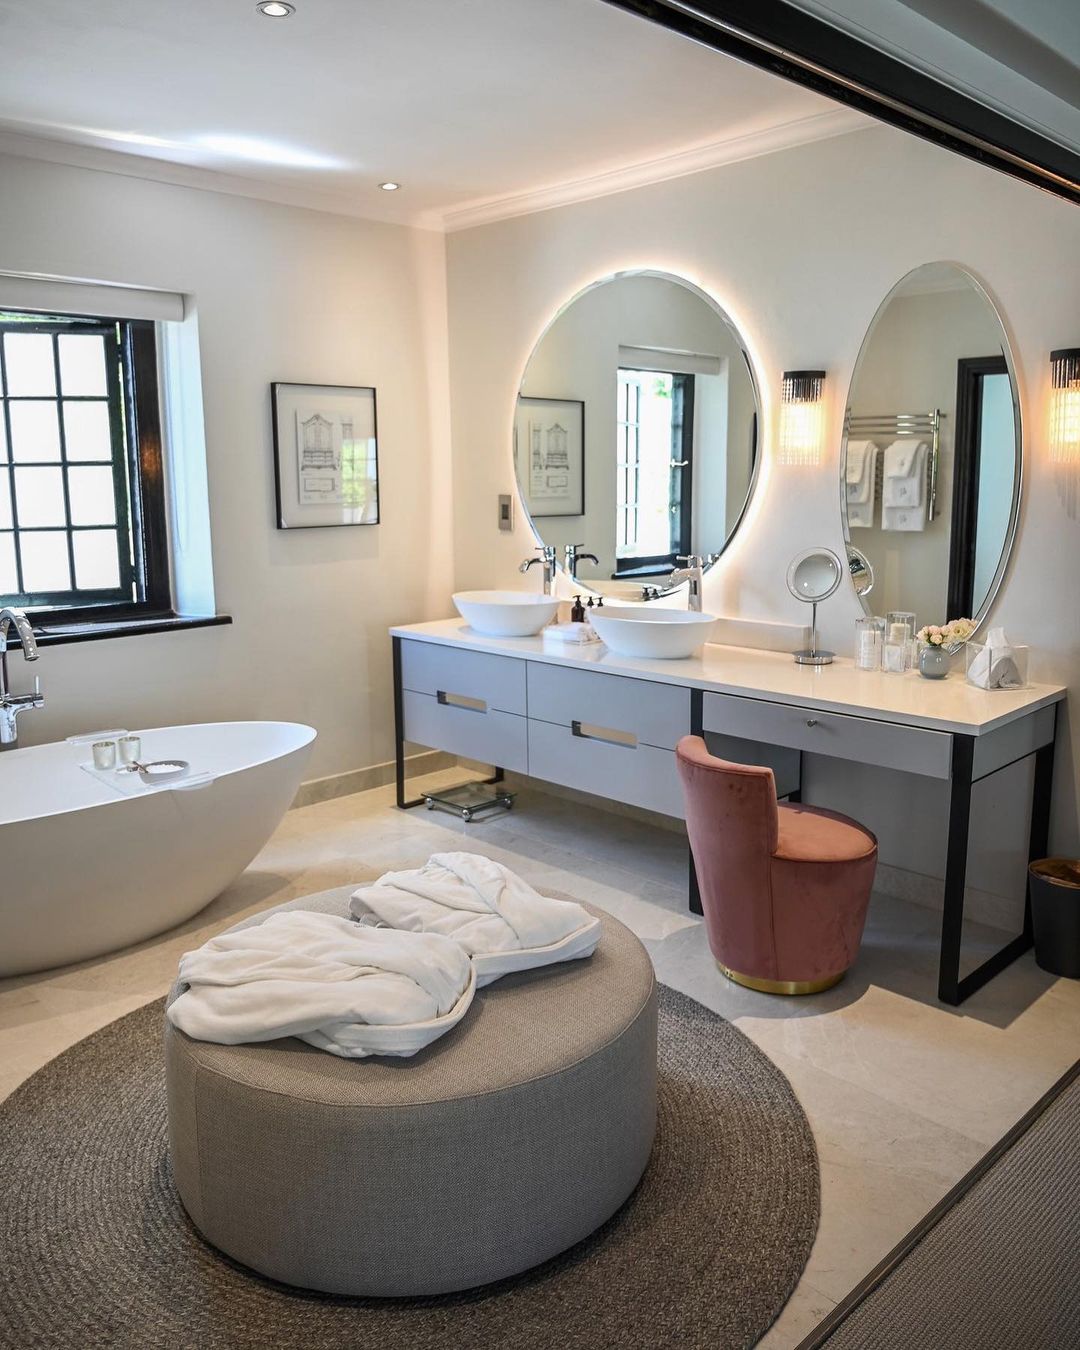 8 Winter-proof Tips You can Steal From Luxury Hotel Bathrooms @Victorianplumb